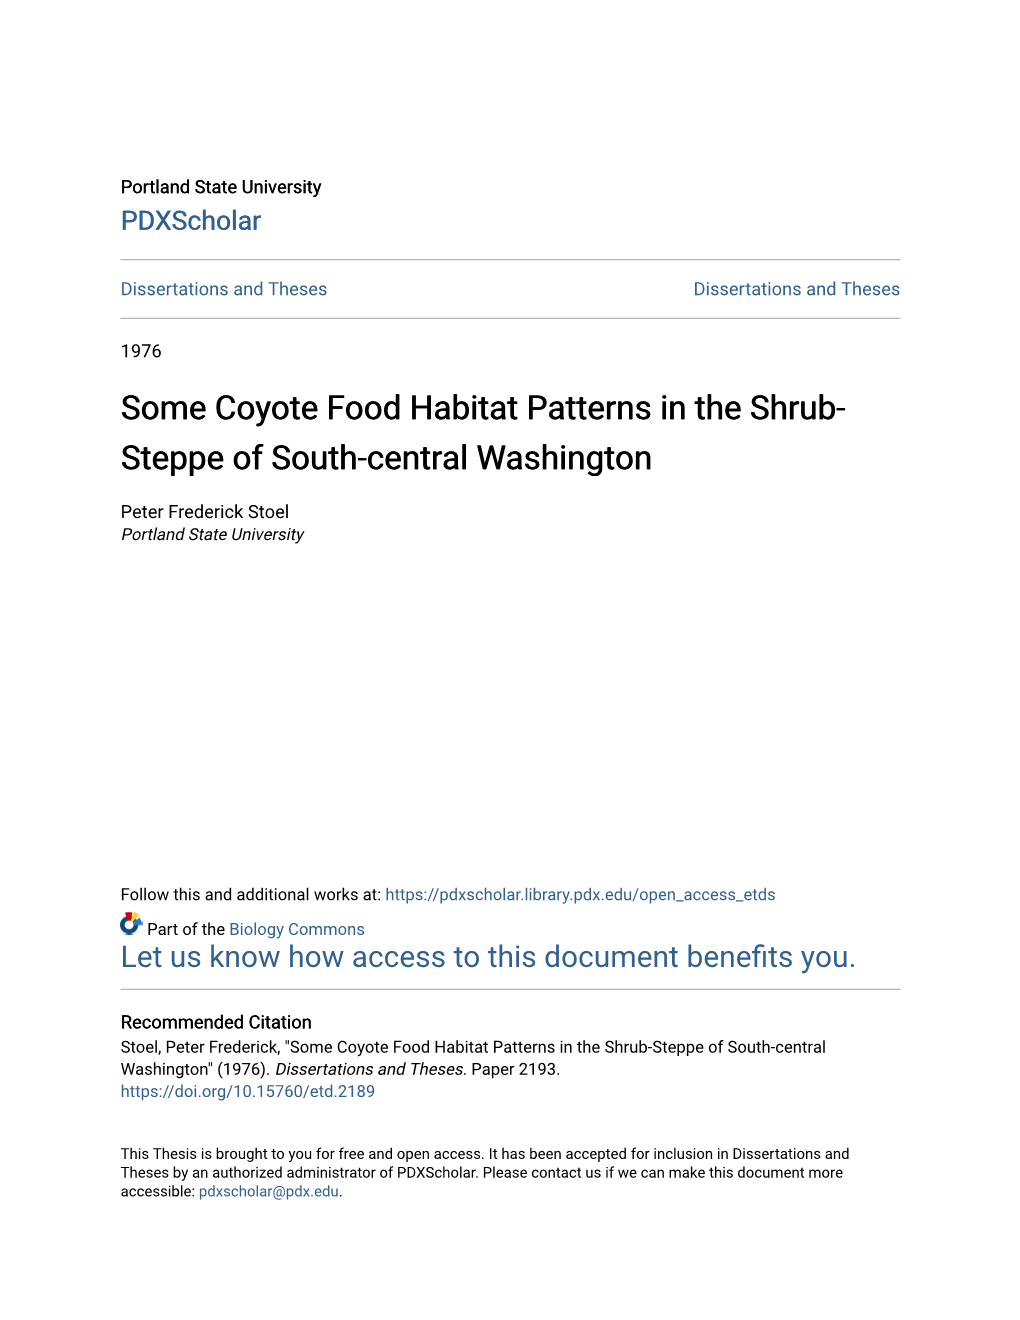 Some Coyote Food Habitat Patterns in the Shrub-Steppe of South-Central Washington" (1976)